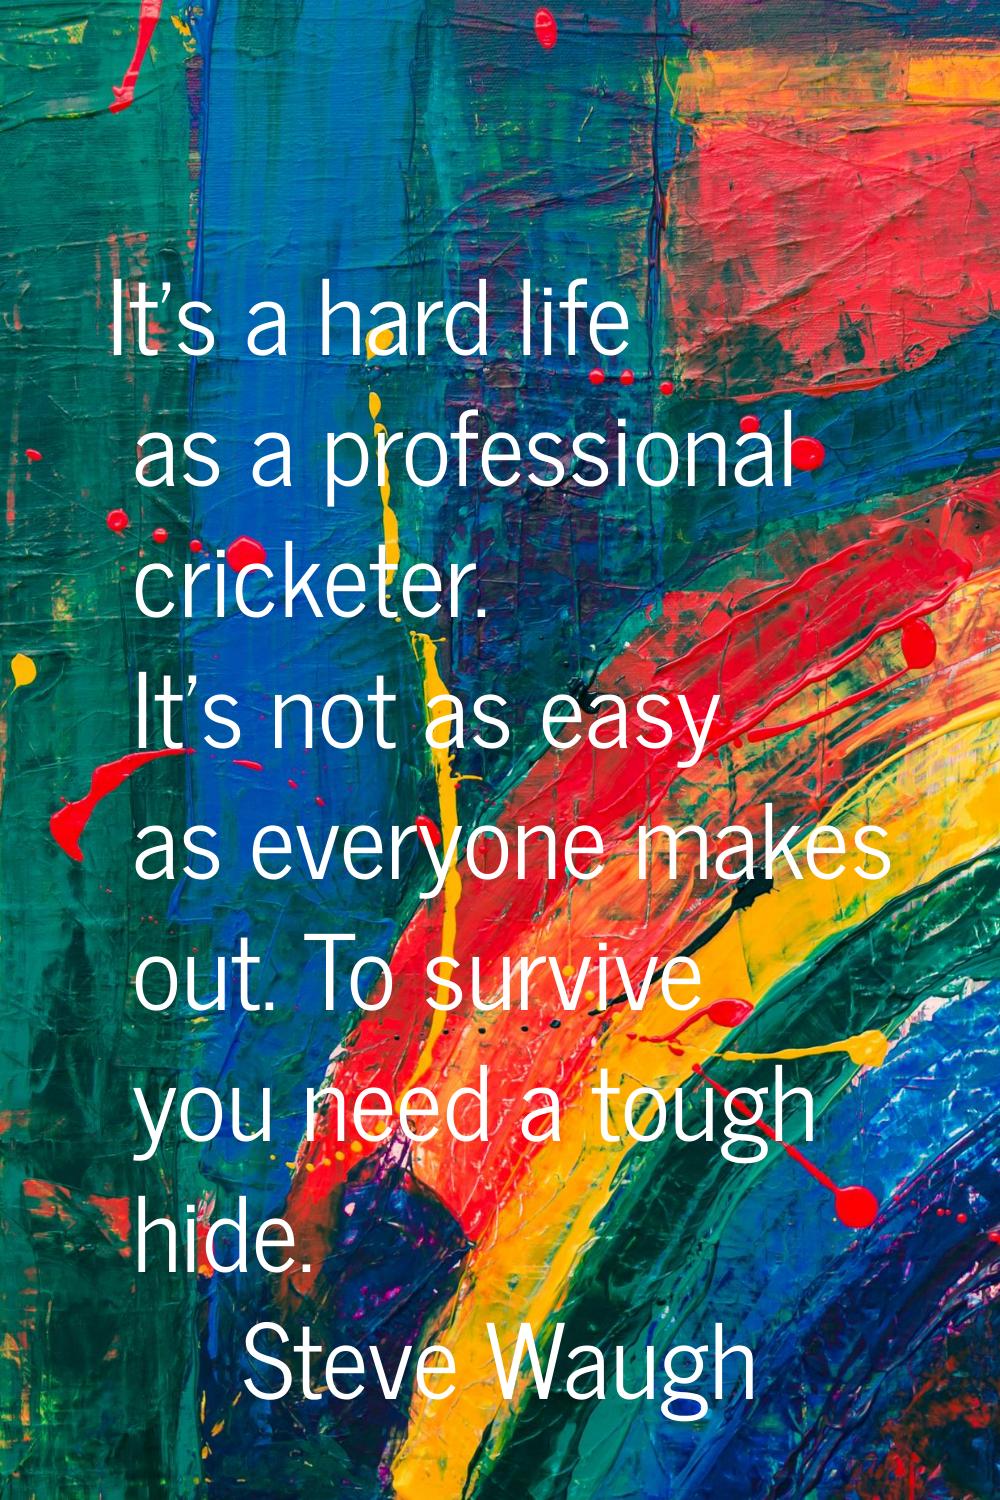 It's a hard life as a professional cricketer. It's not as easy as everyone makes out. To survive yo